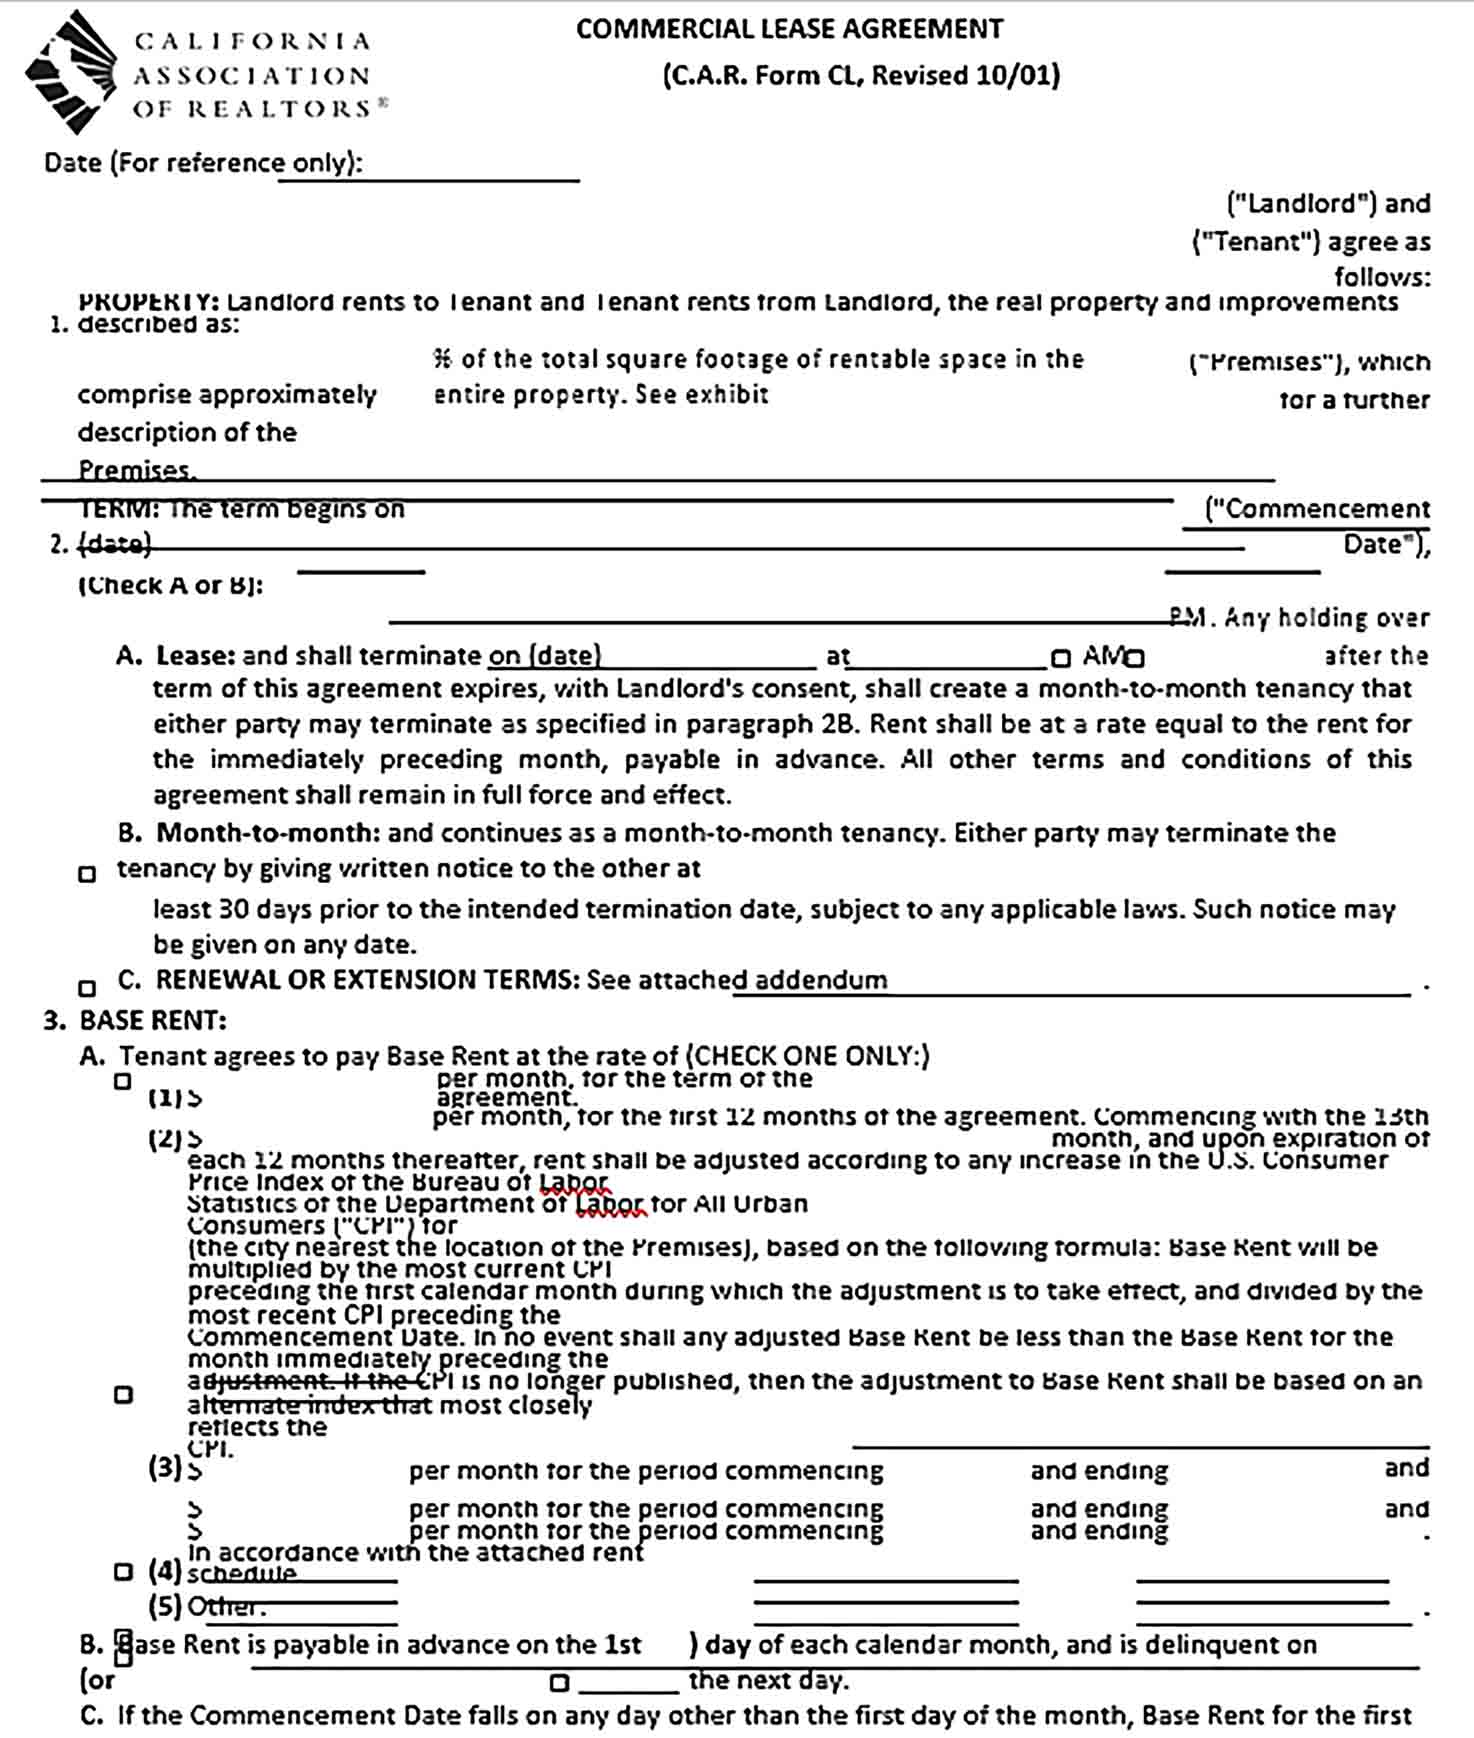 Sample Commercial Lease Agreement 002